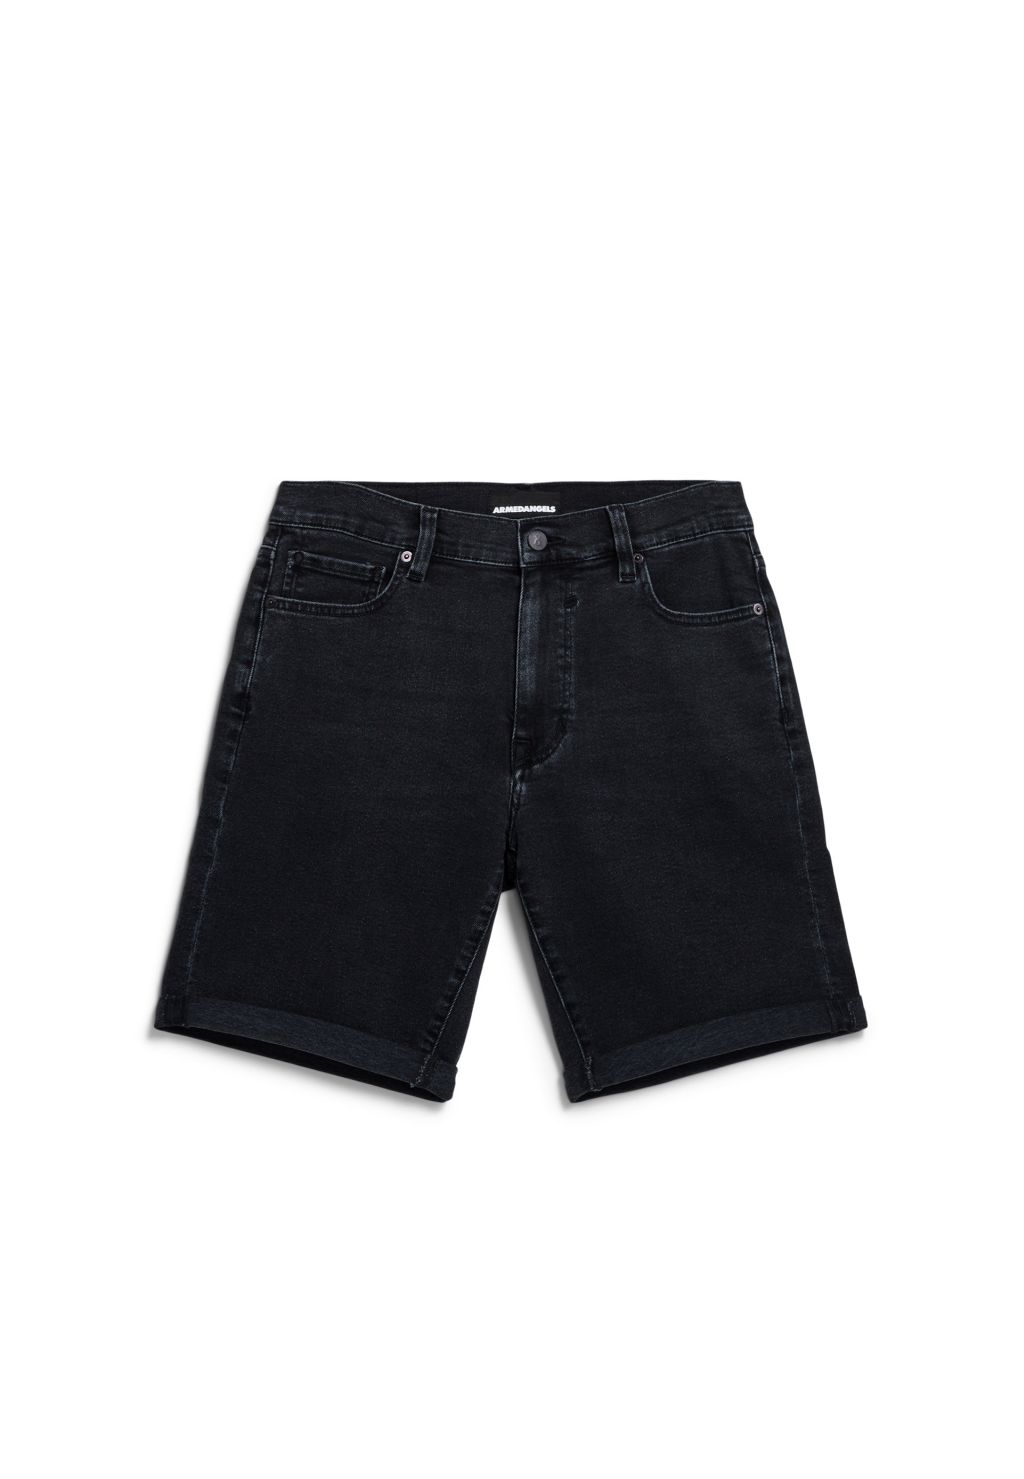 Naailo Black DNM Black Washed Authentic  29